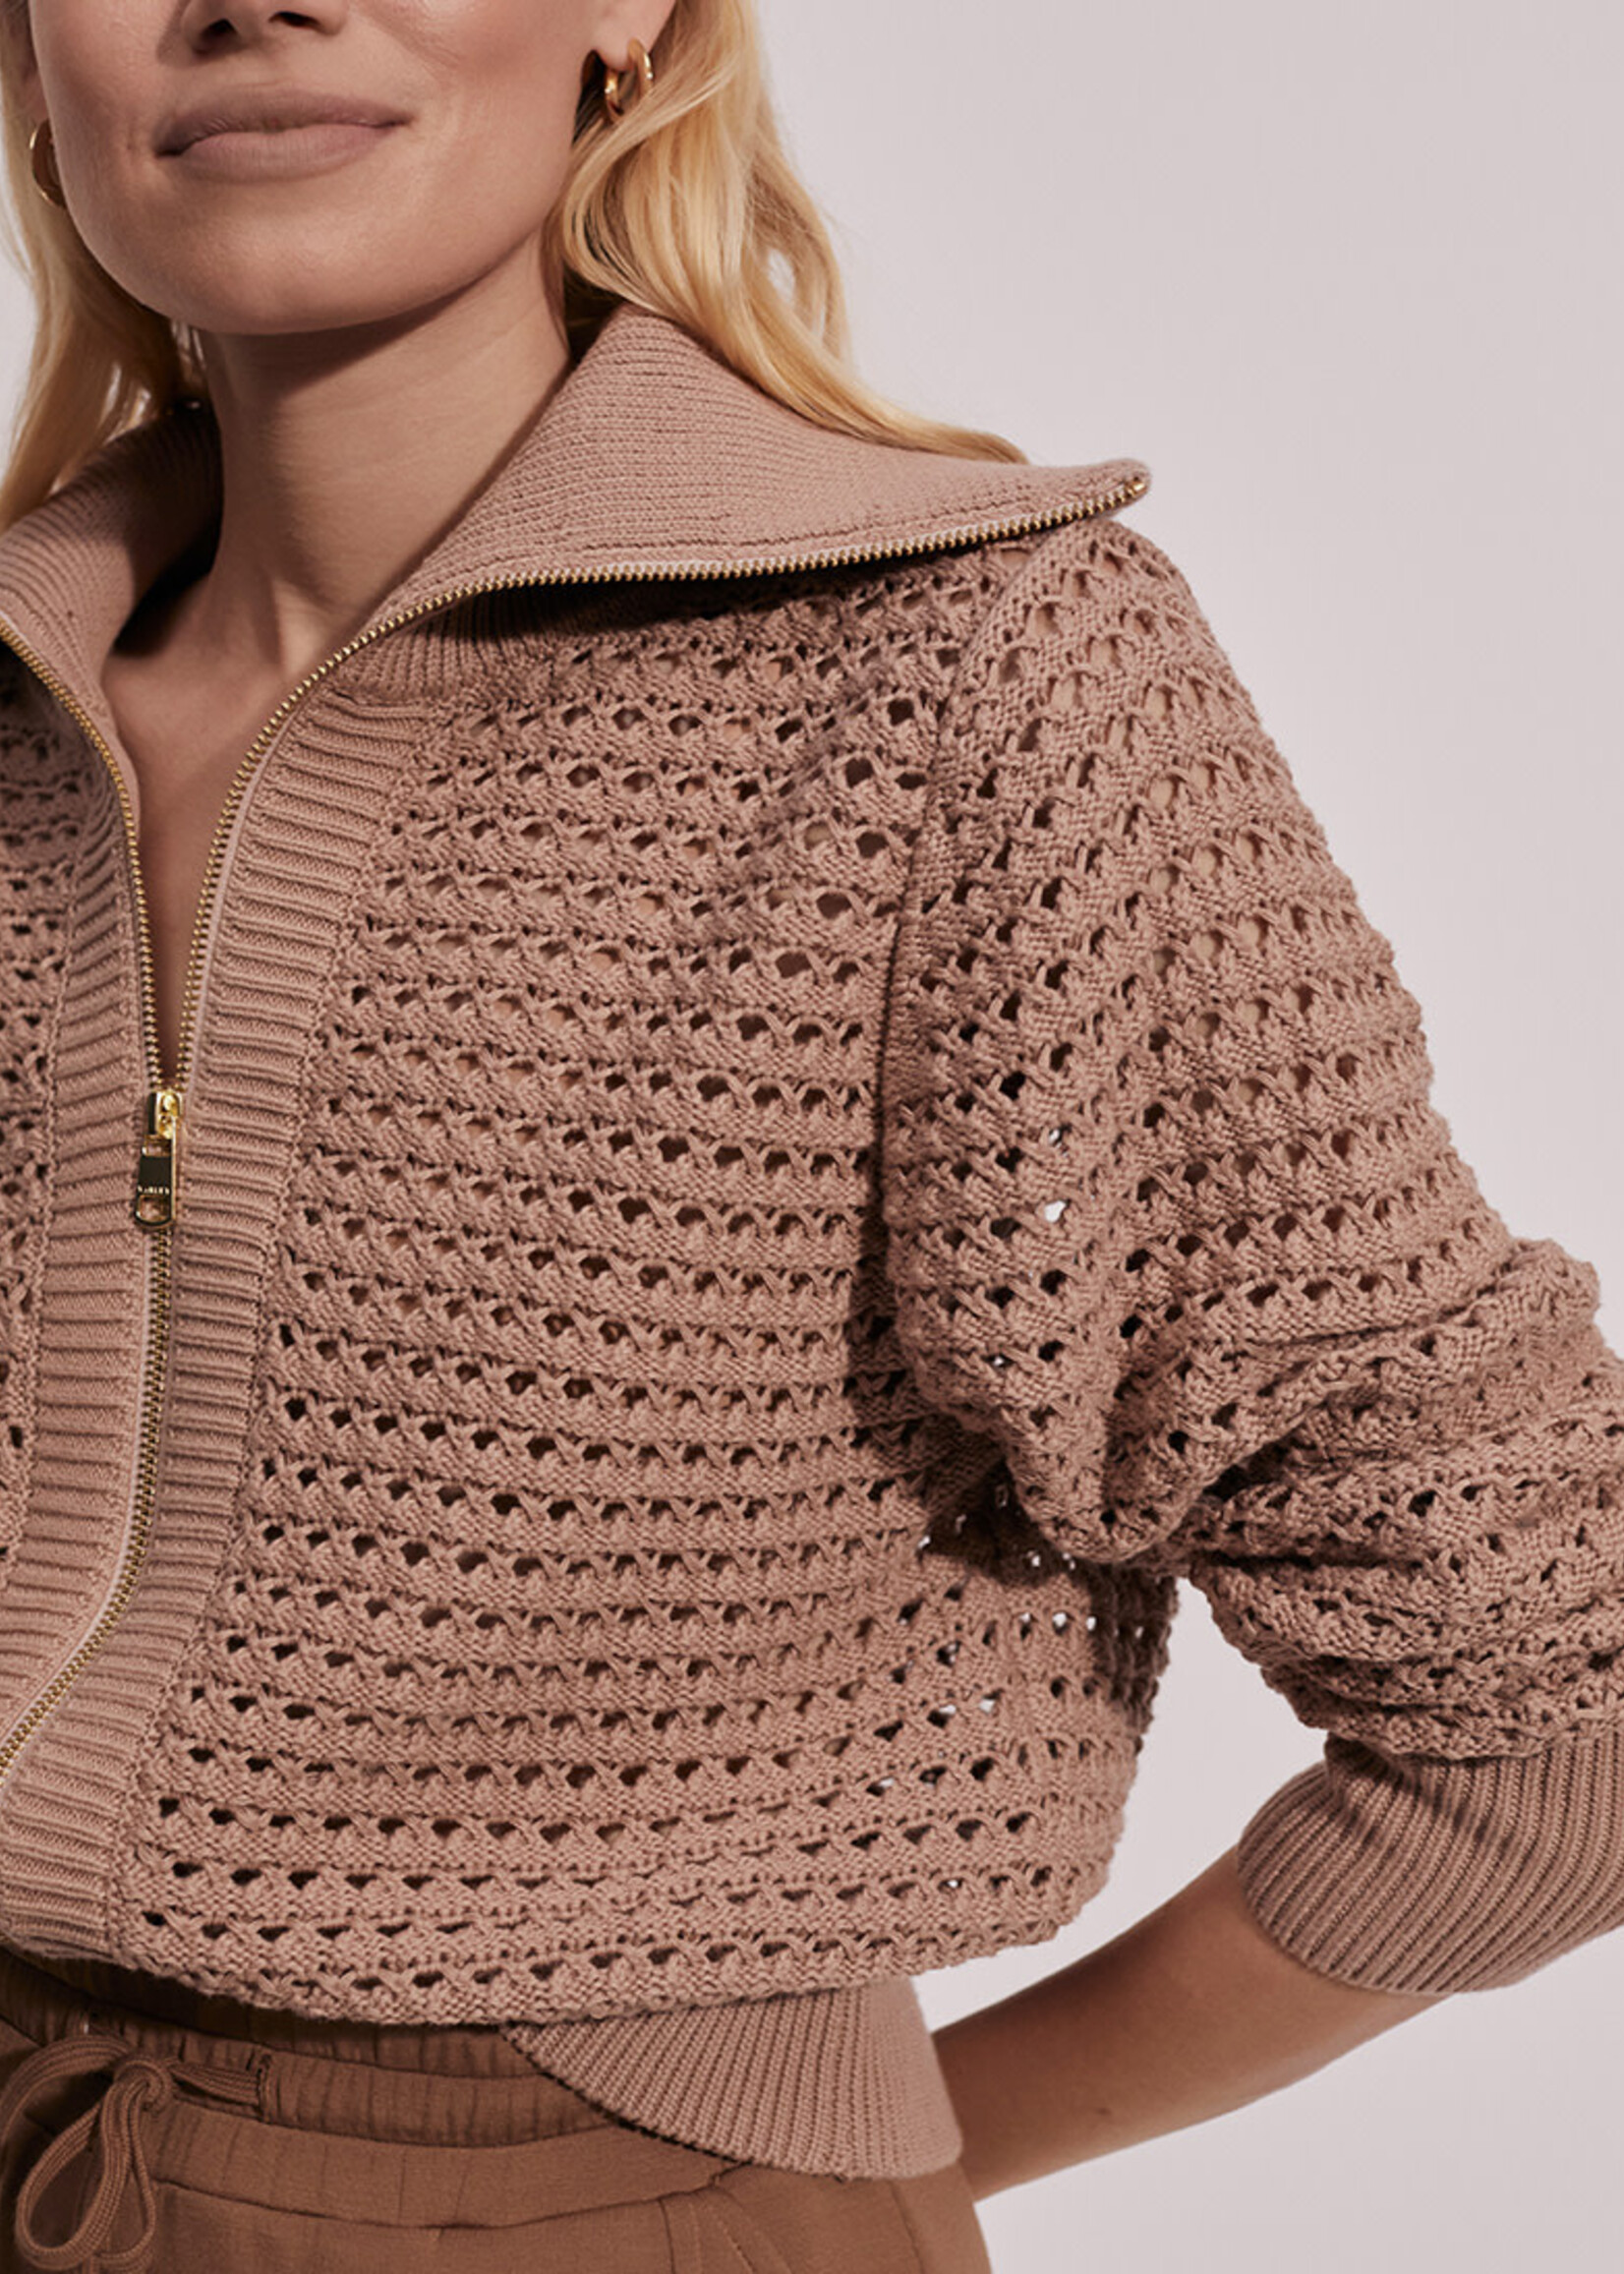 Varley Eloise Full Zip Knit Warm Taupe